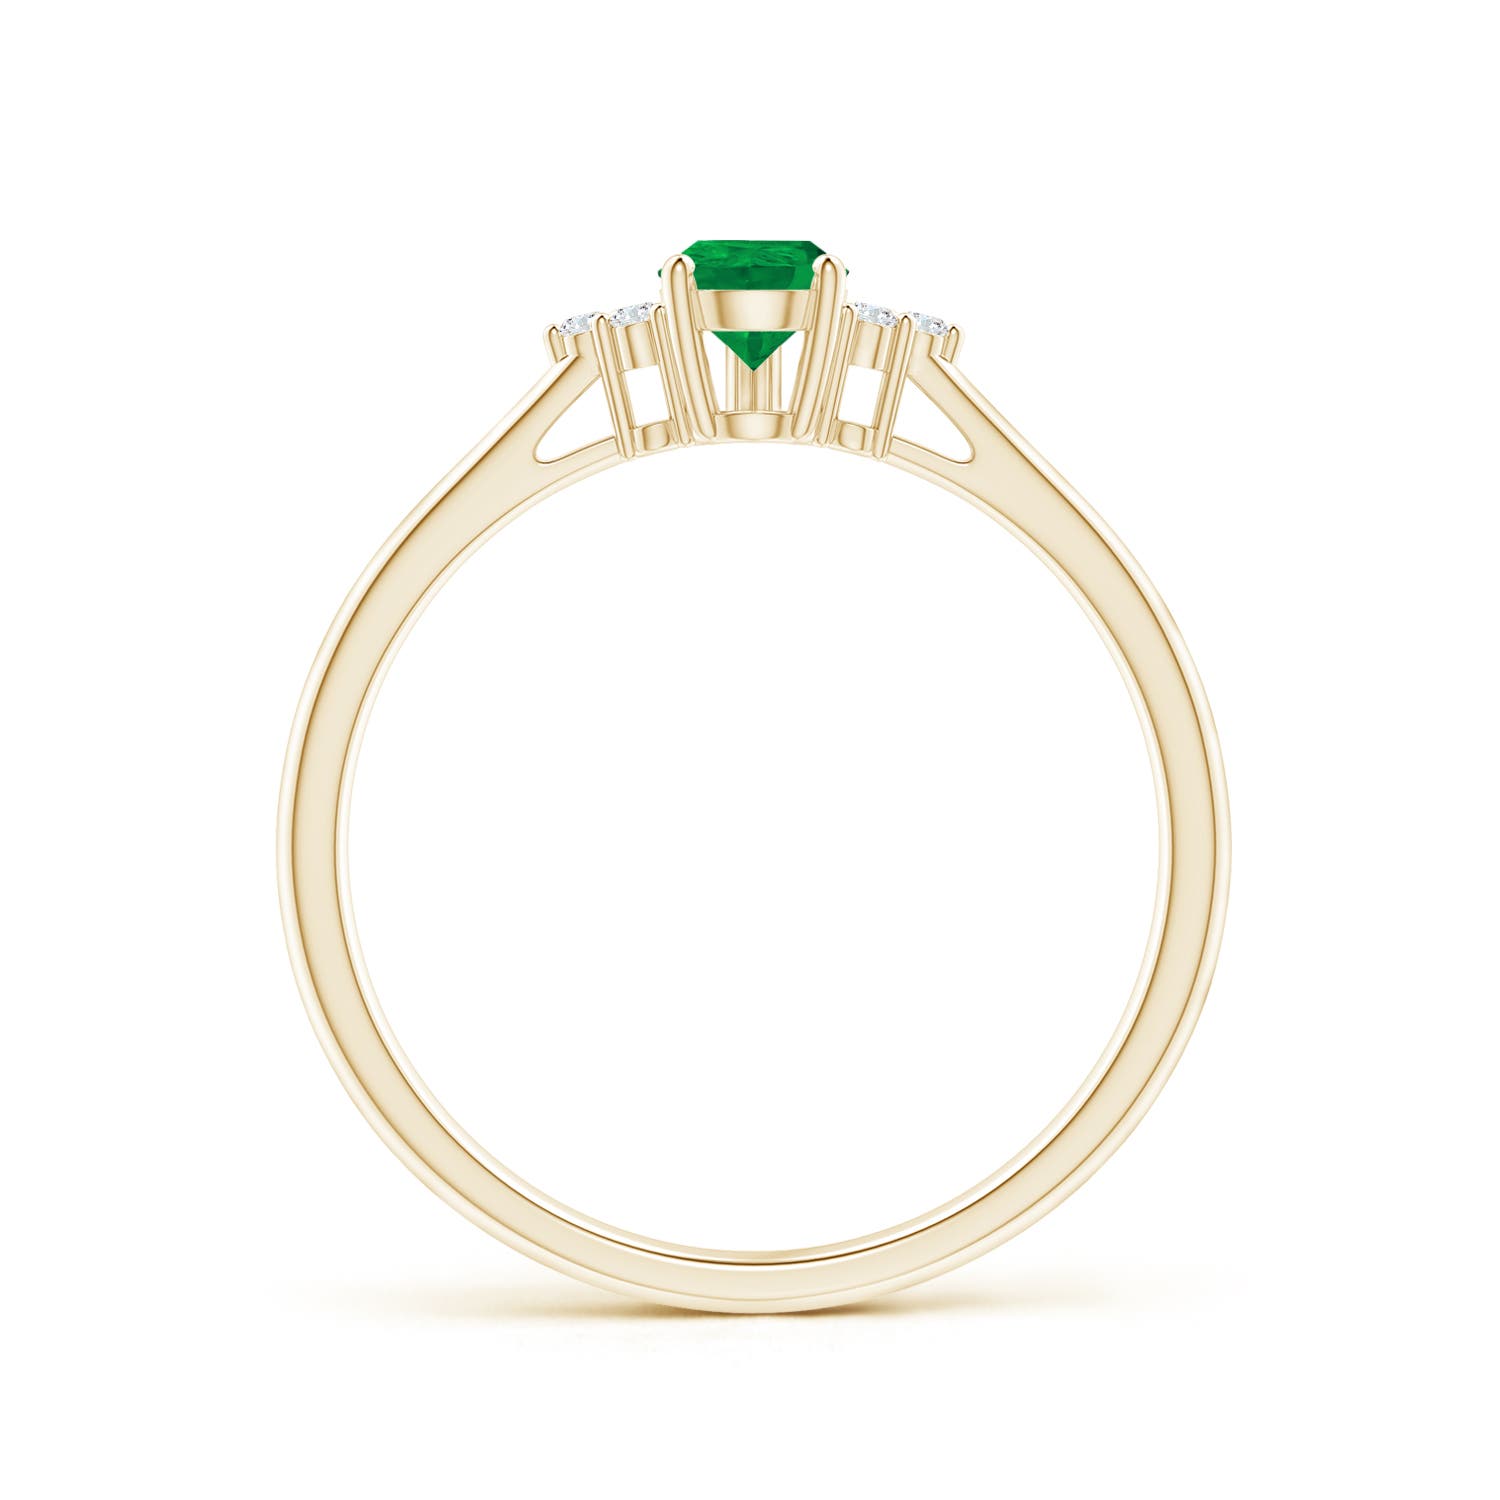 AA - Emerald / 0.4 CT / 14 KT Yellow Gold